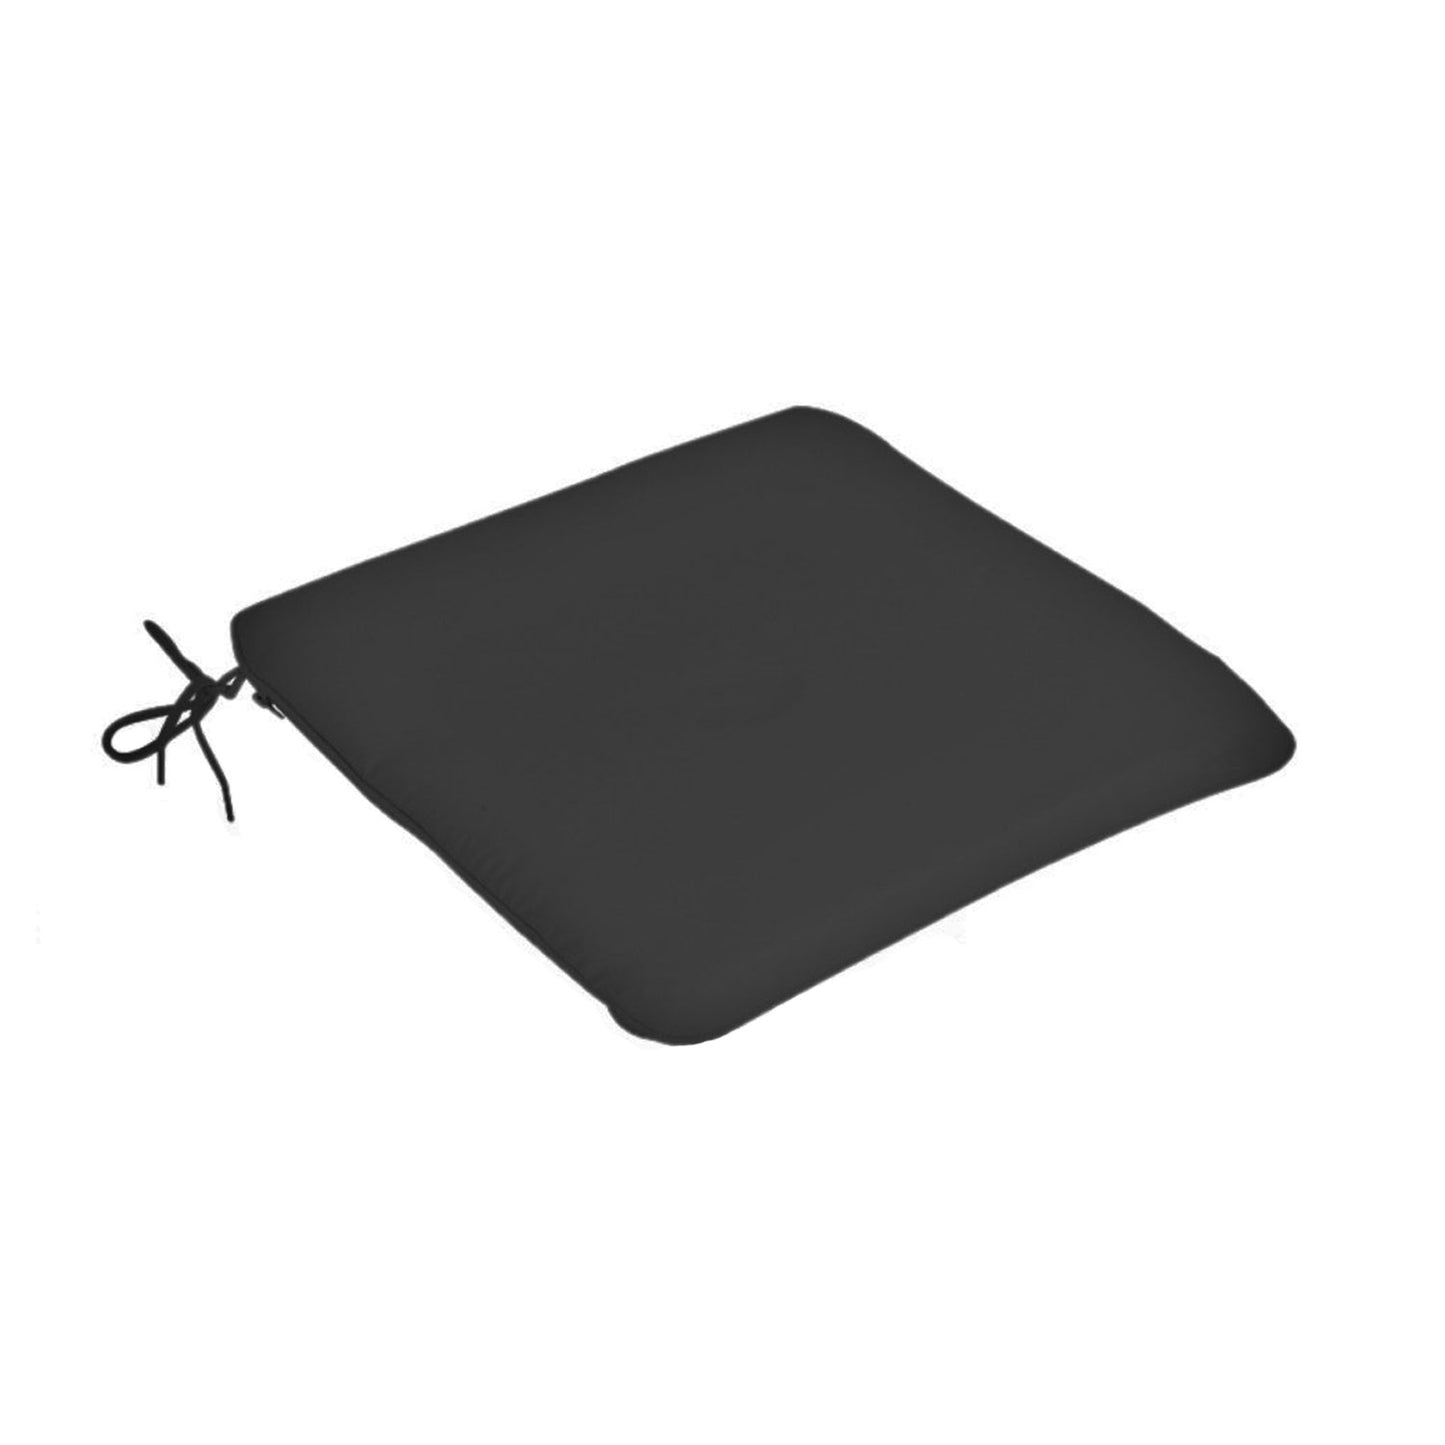 CC Collection Black Garden Seat Pad (Pack of 2)